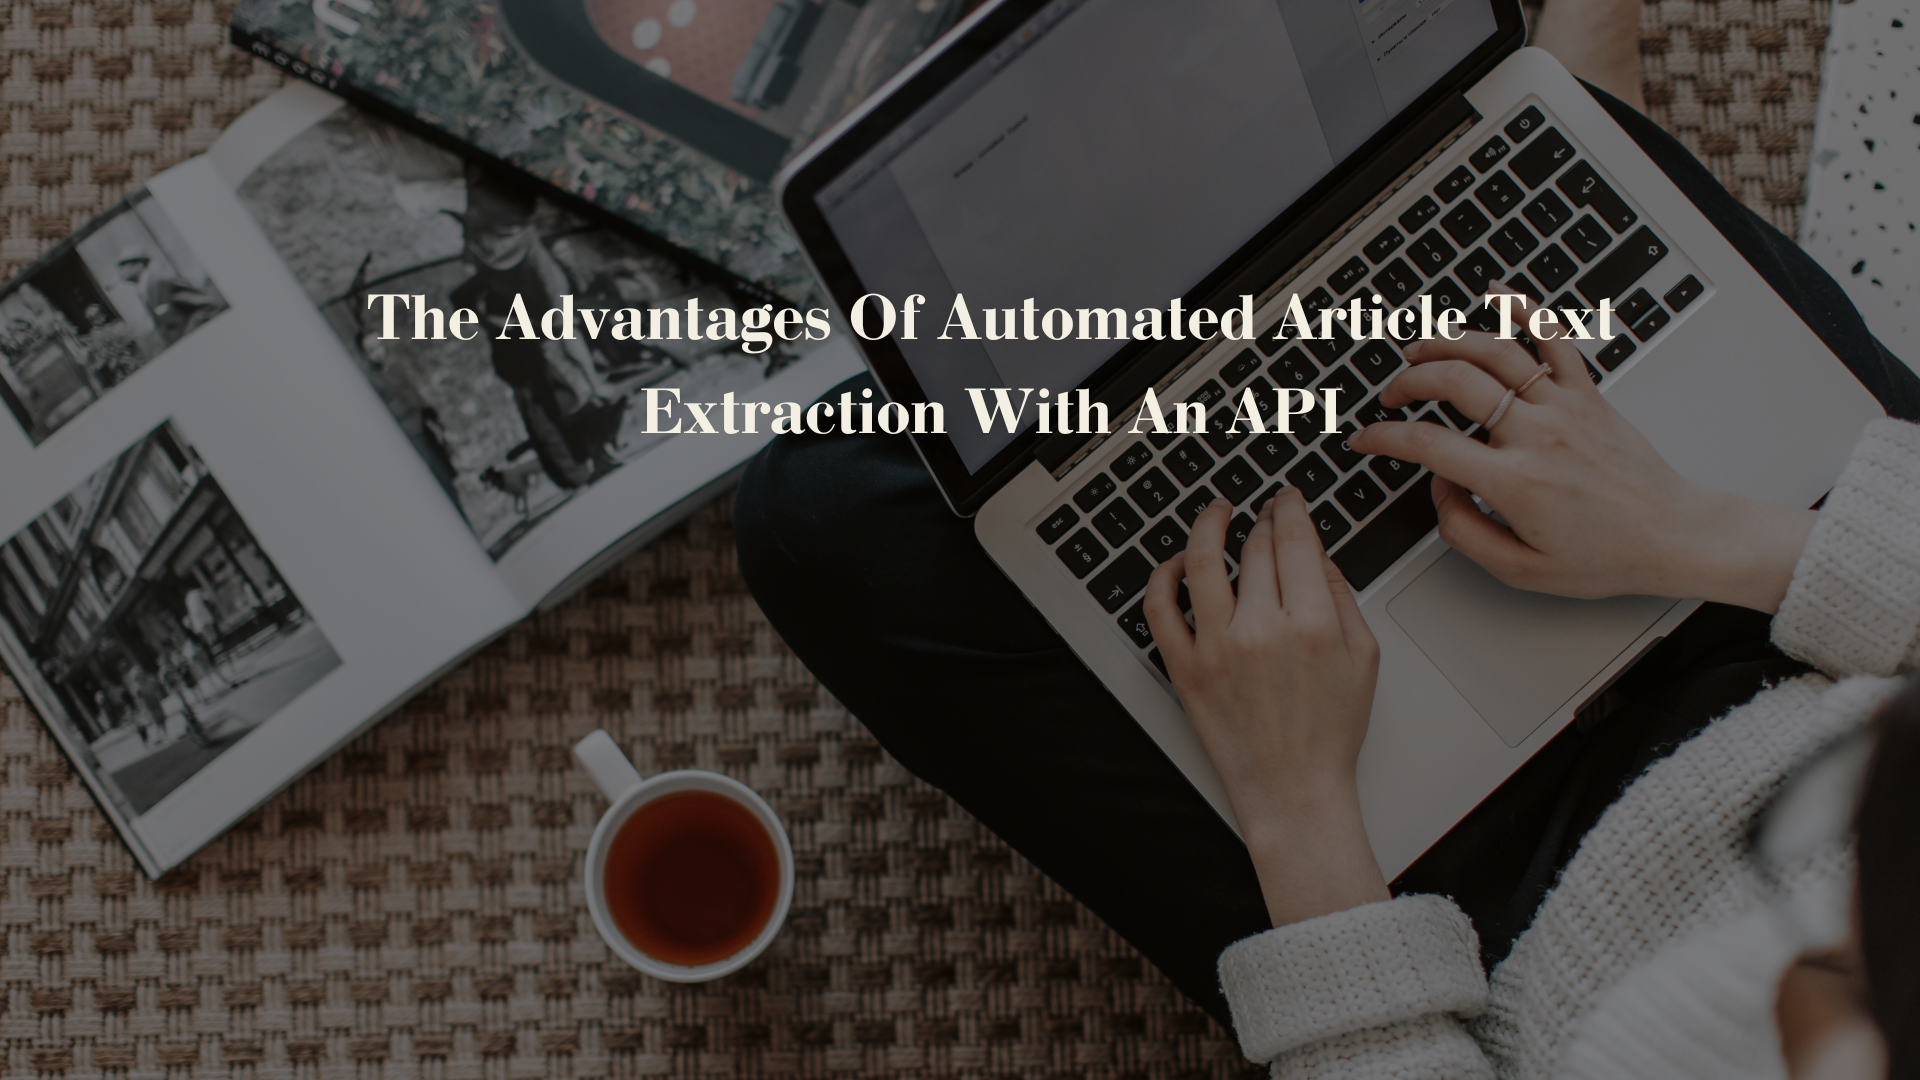 The Advantages Of Automated Article Text Extraction With An API